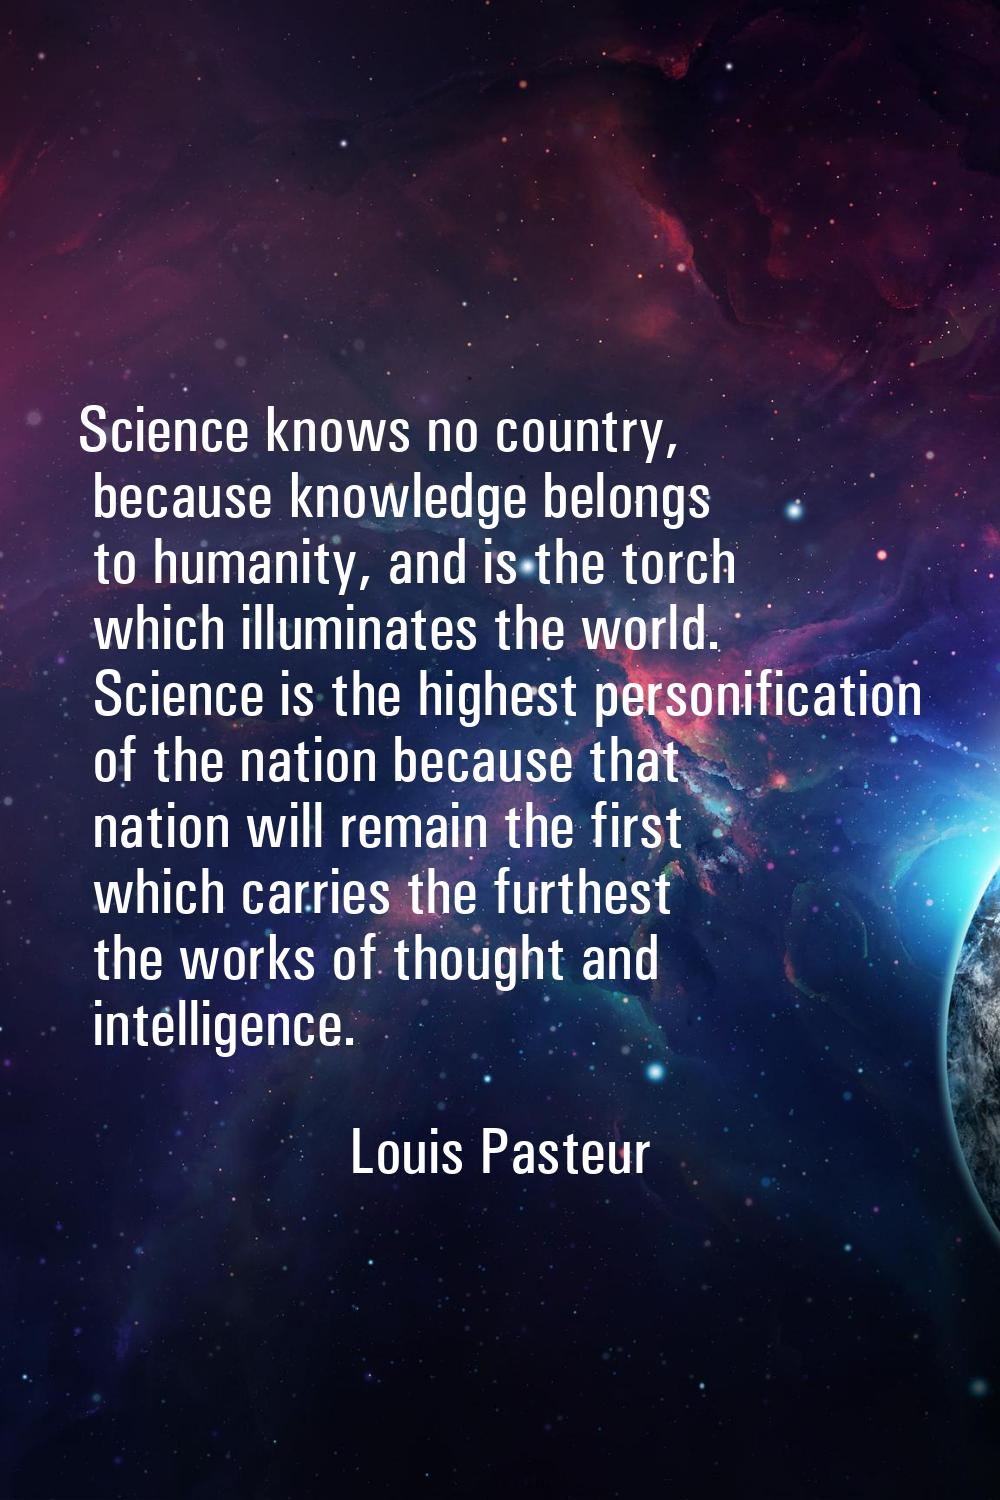 Science knows no country, because knowledge belongs to humanity, and is the torch which illuminates